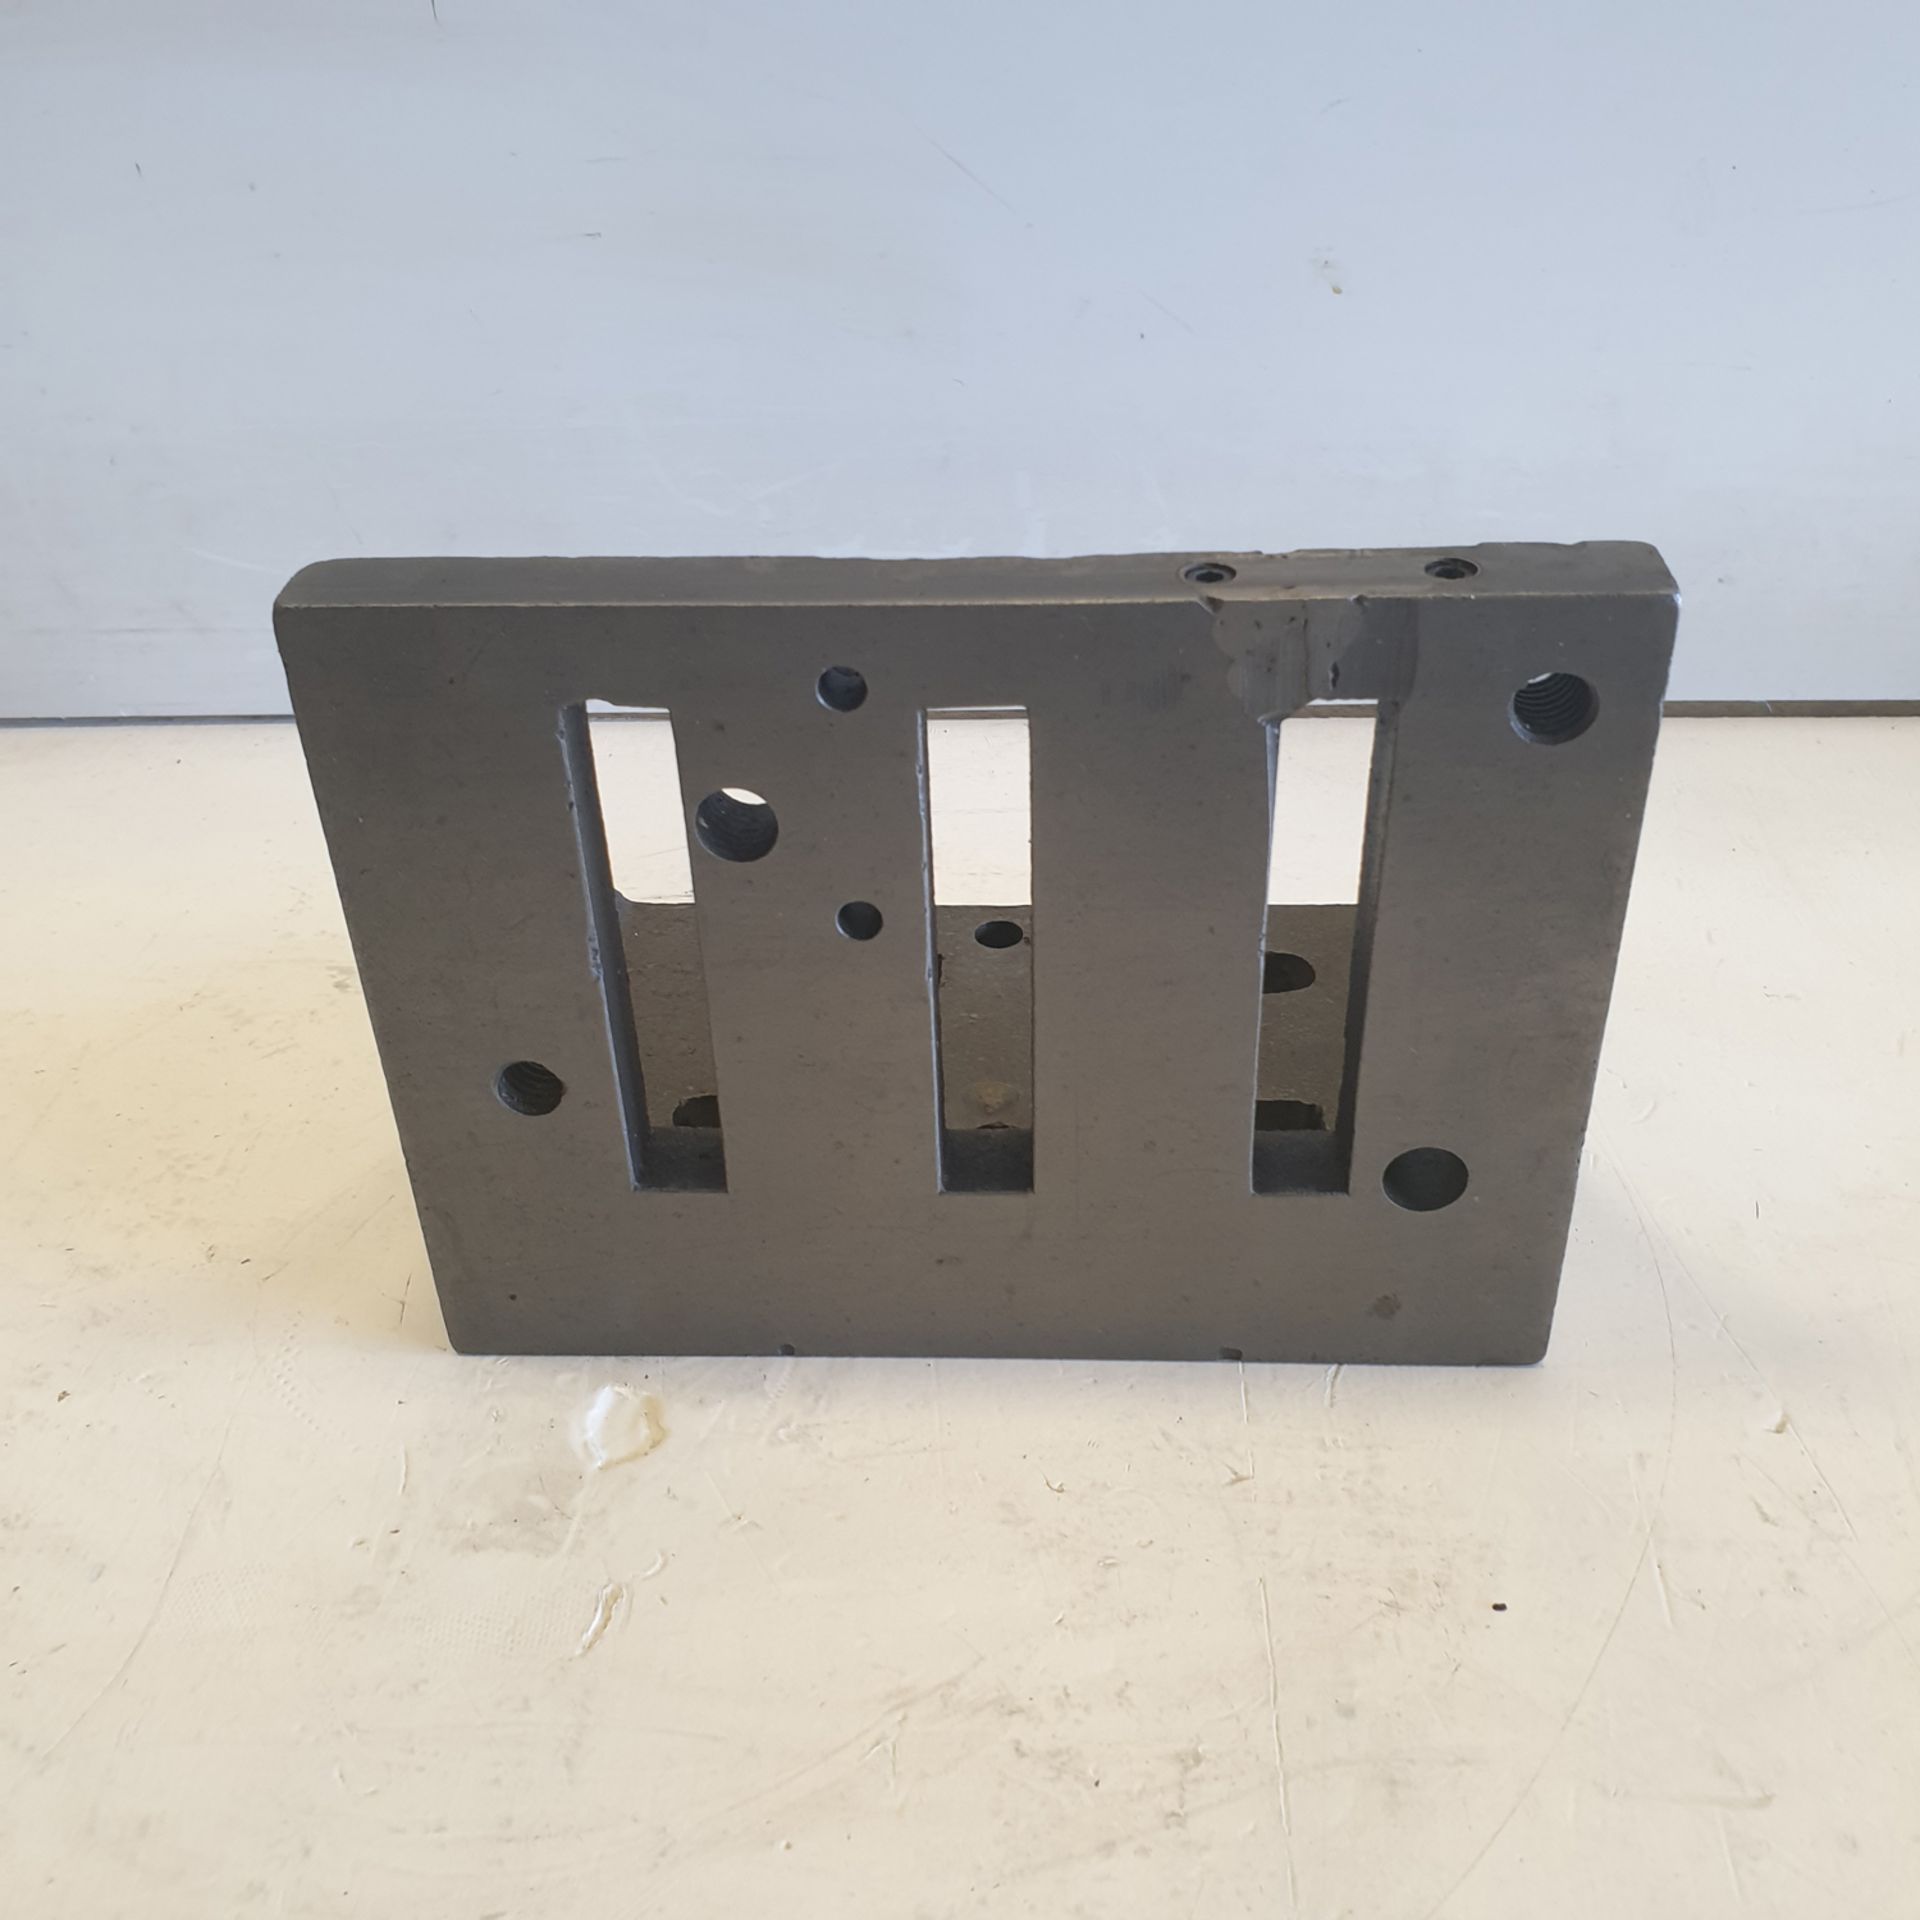 Slotted Angle Plate. Approx Dimensions 8" x 6", 8" x 5".